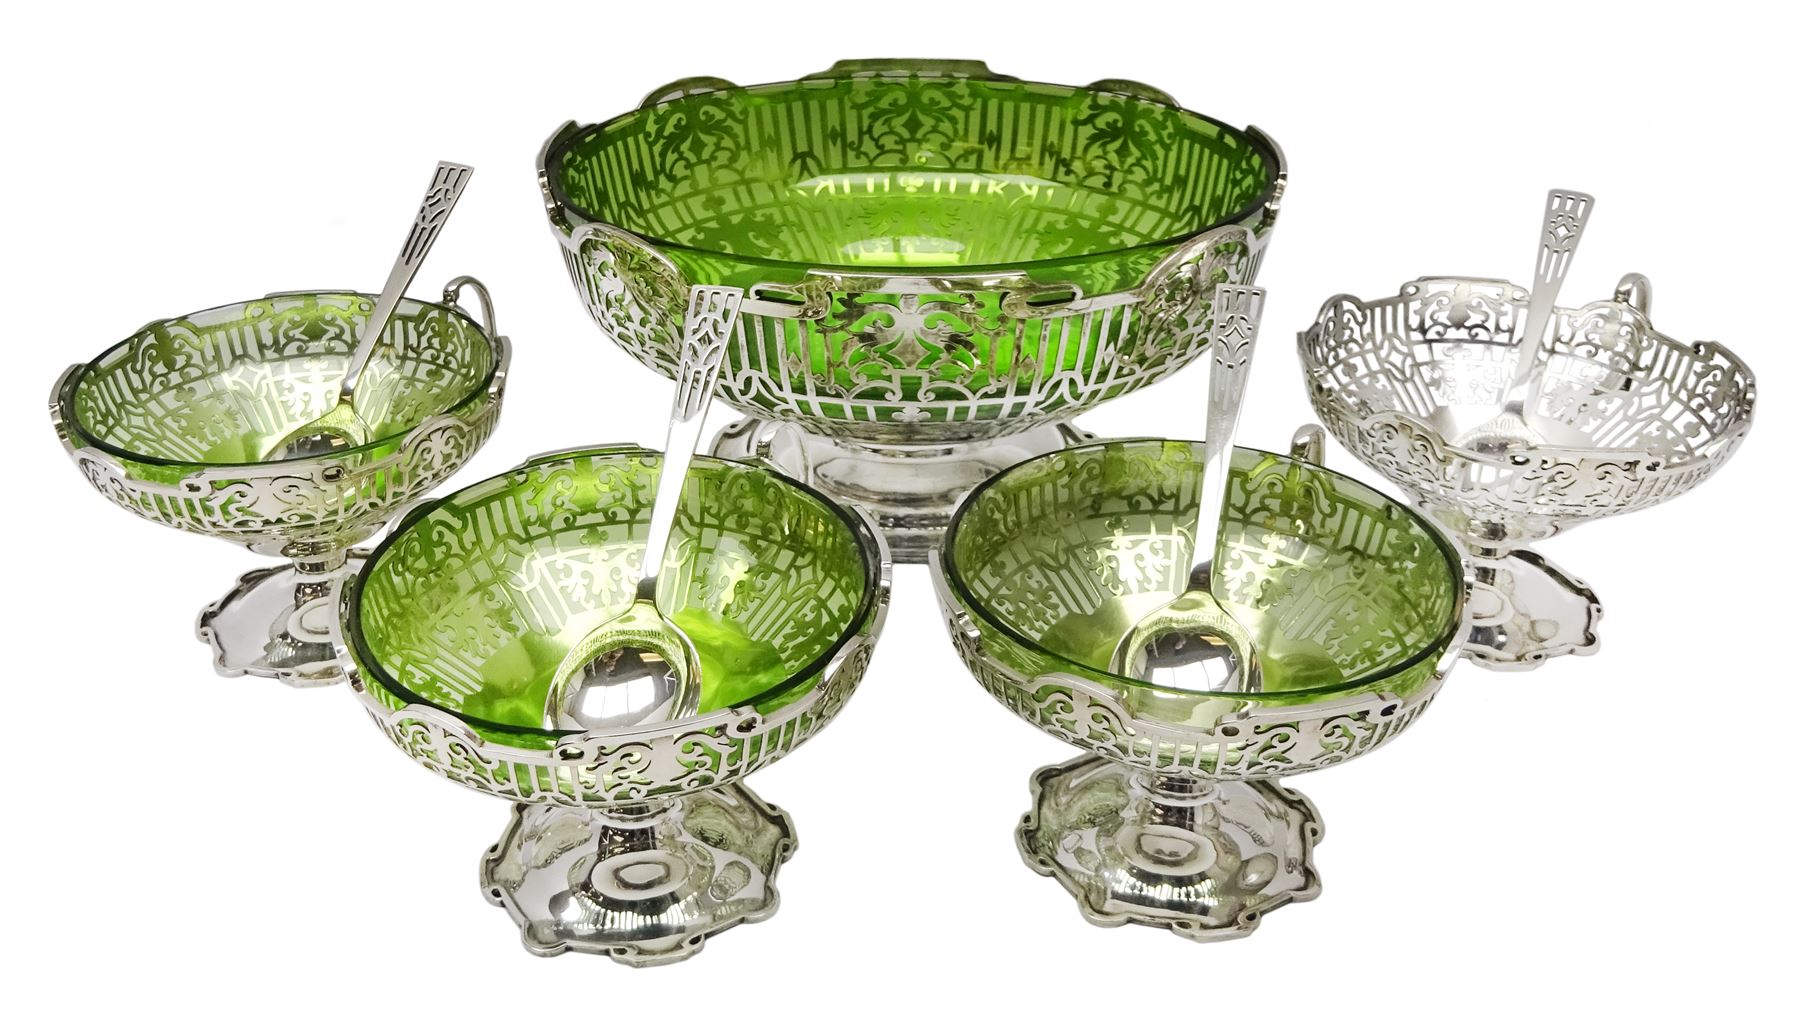 Silver open fretwork dessert service comprising of a pedestal with green glass liner and four matchi